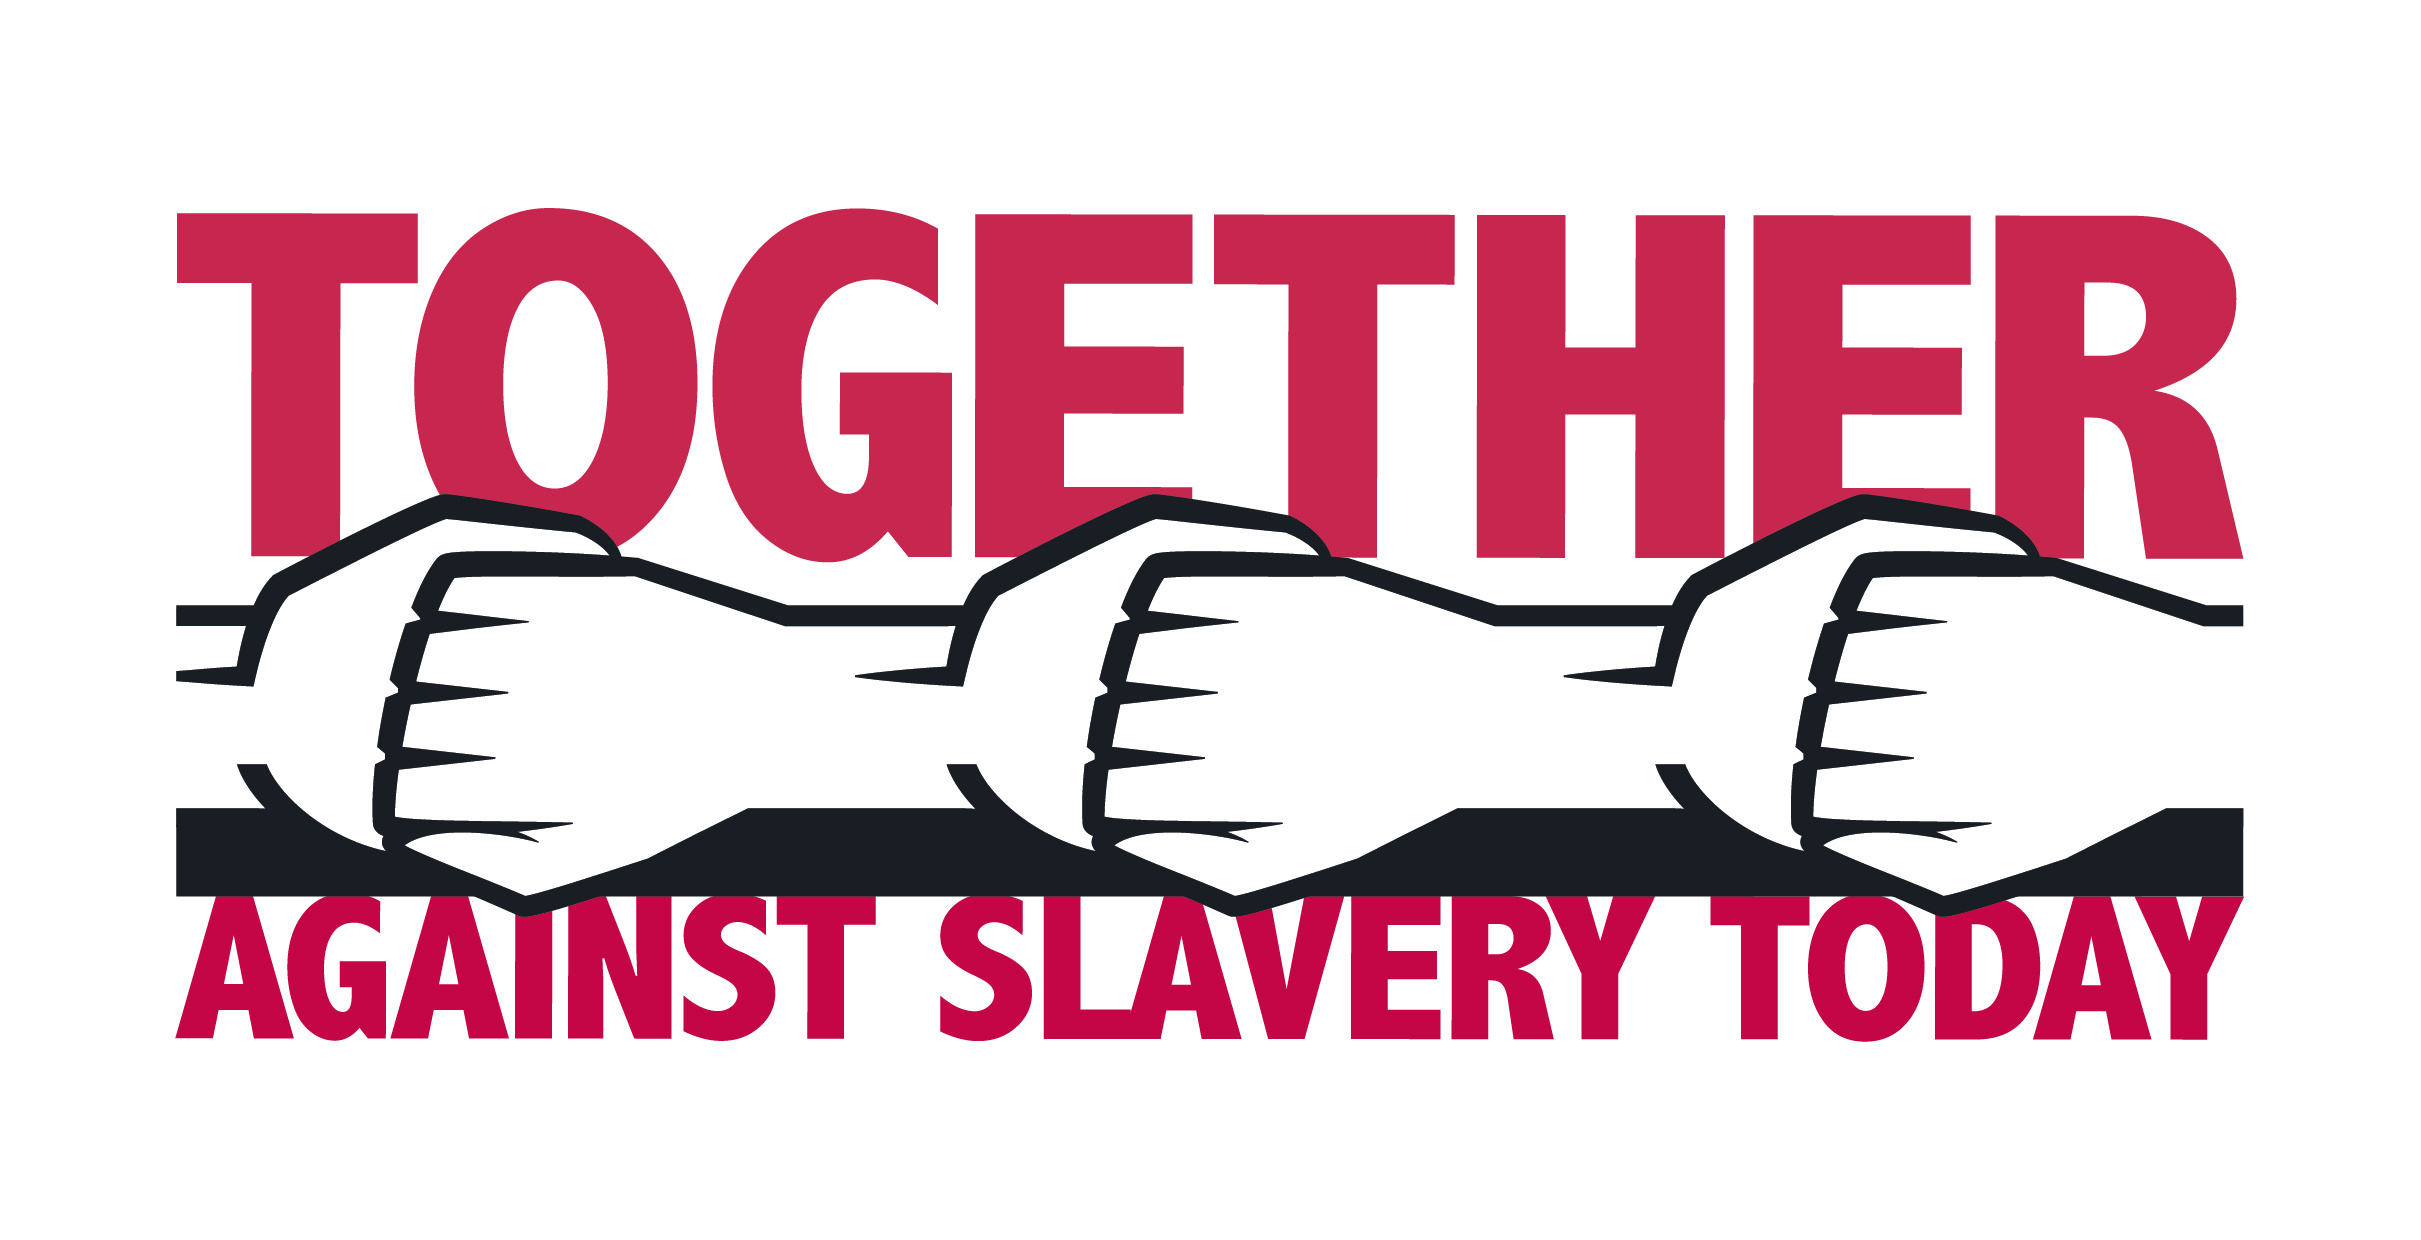 Free anti cliparts download. Slavery clipart modern slavery